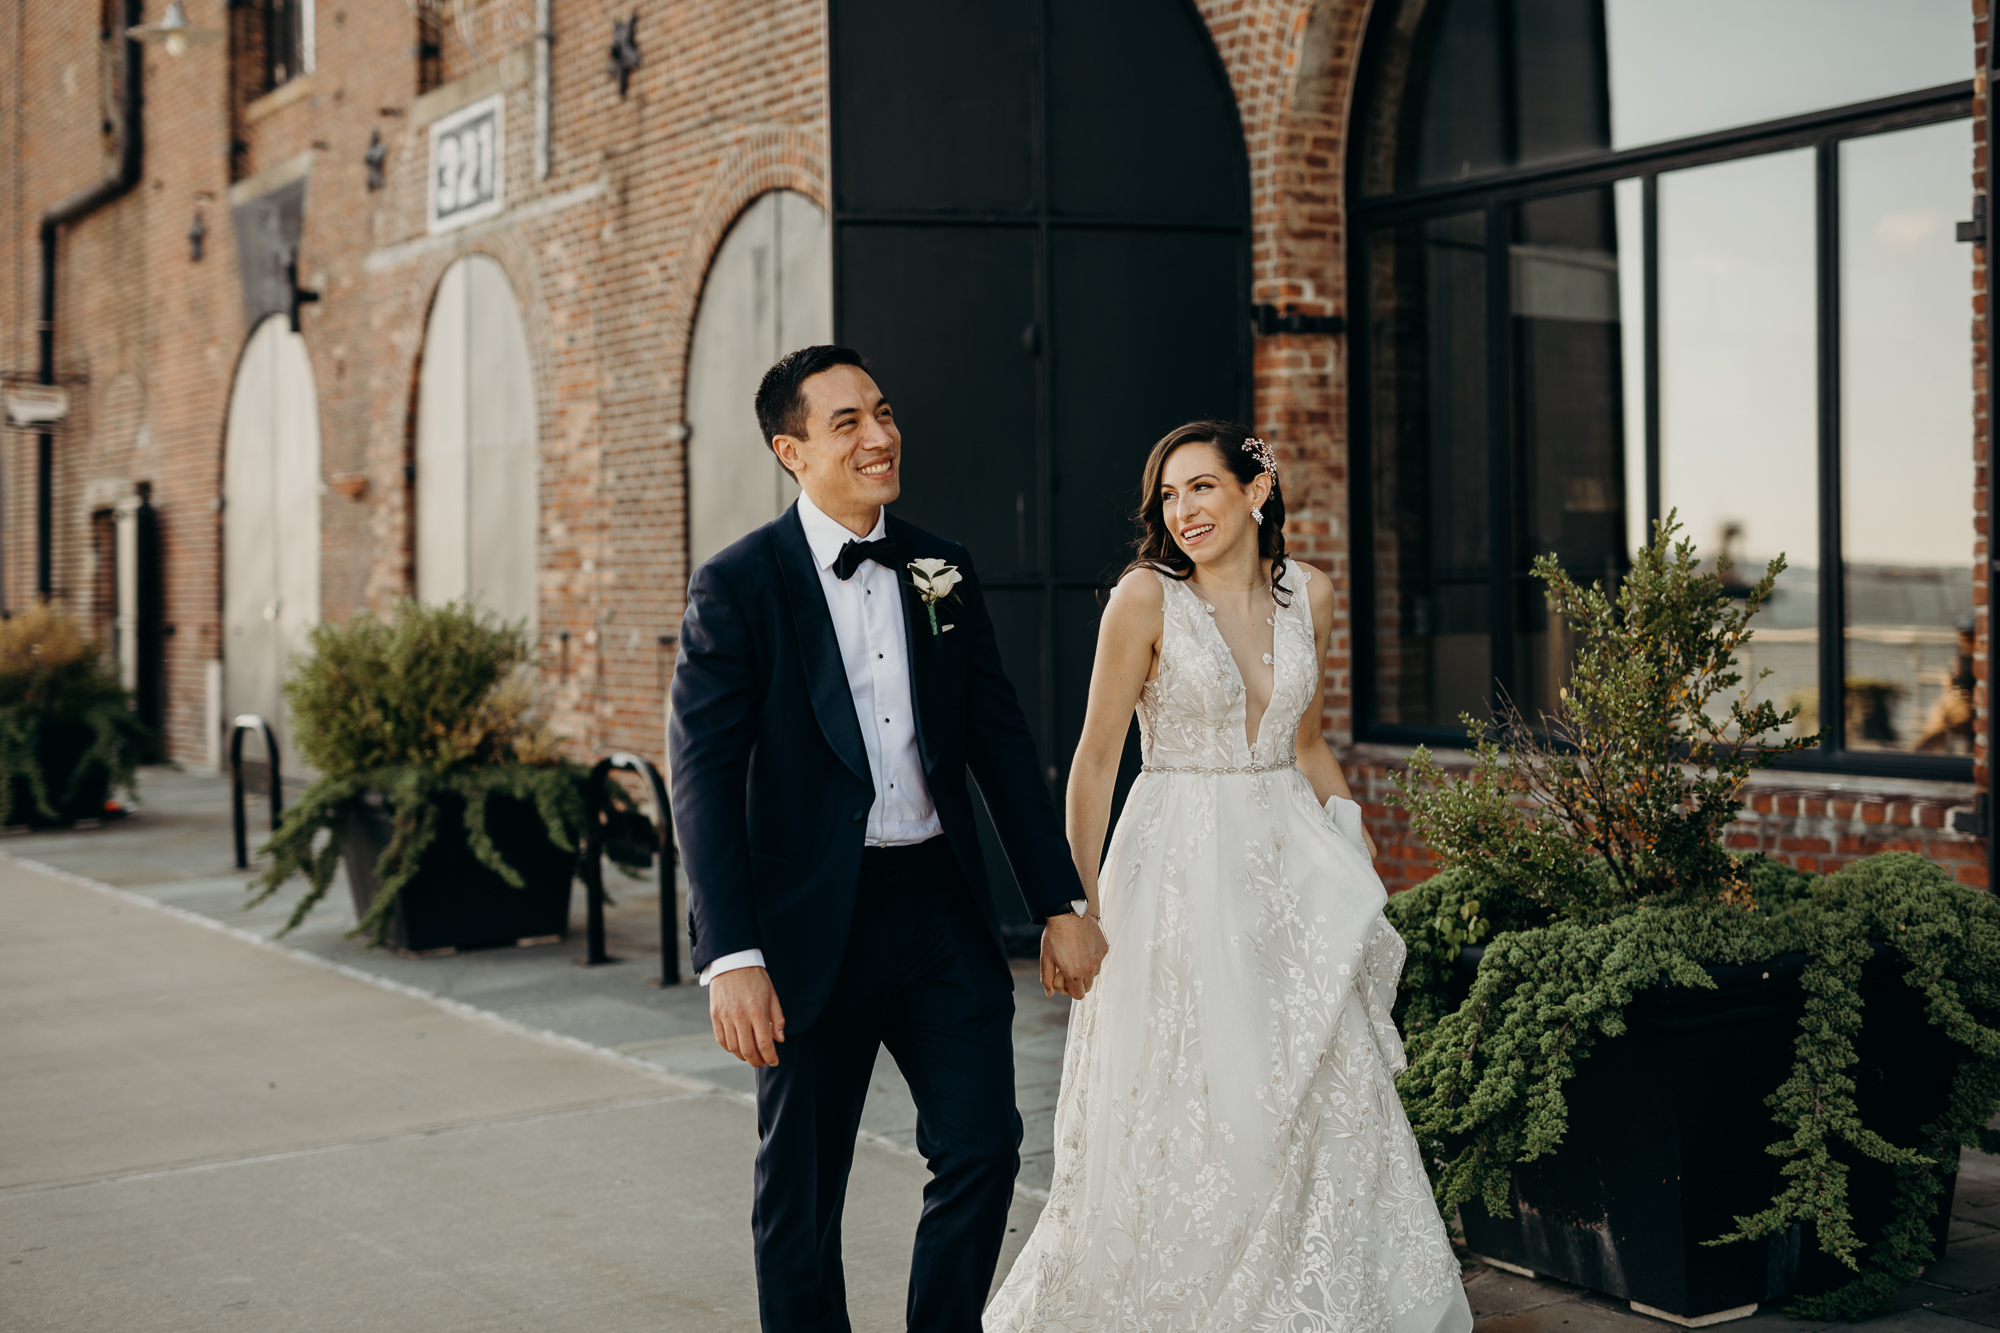 a portrait of a bride and groom on their wedding day at liberty warehouse in brooklyn, new york city